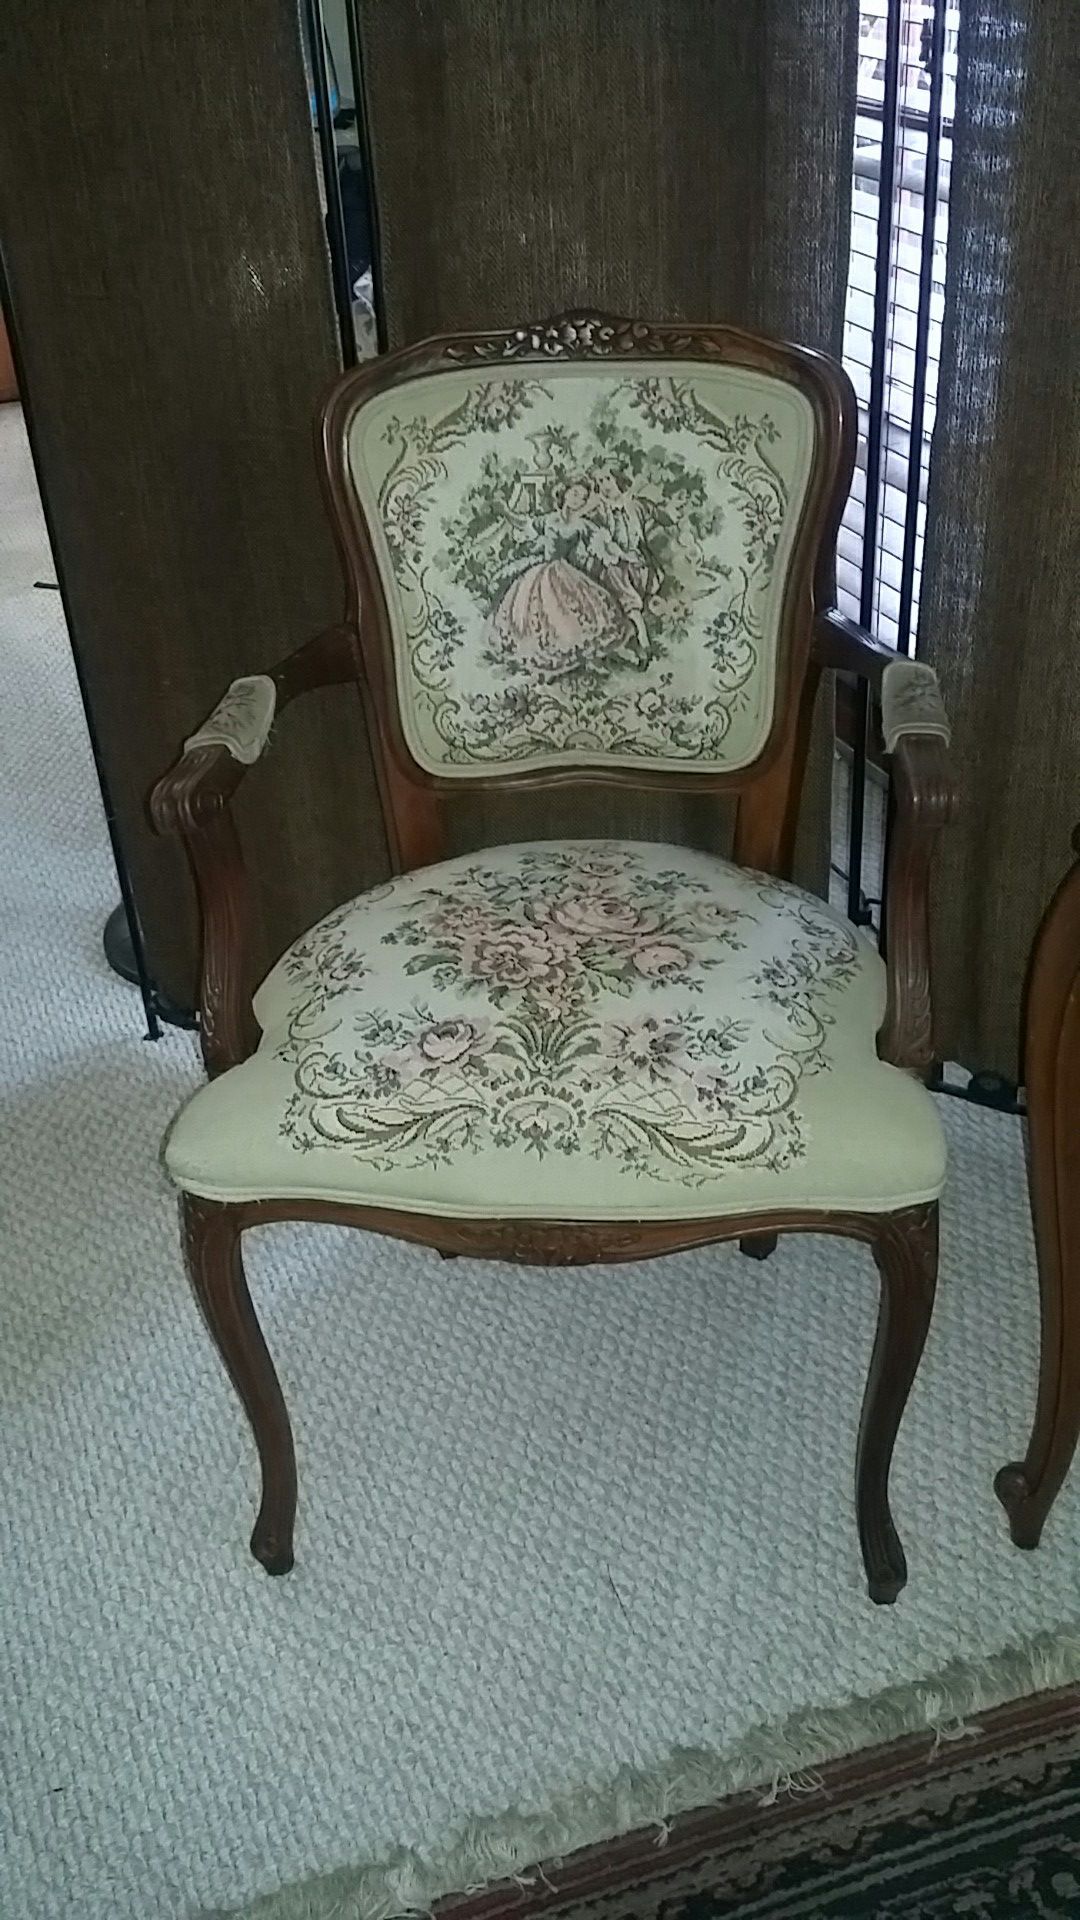 Replica antique chair from the 60's